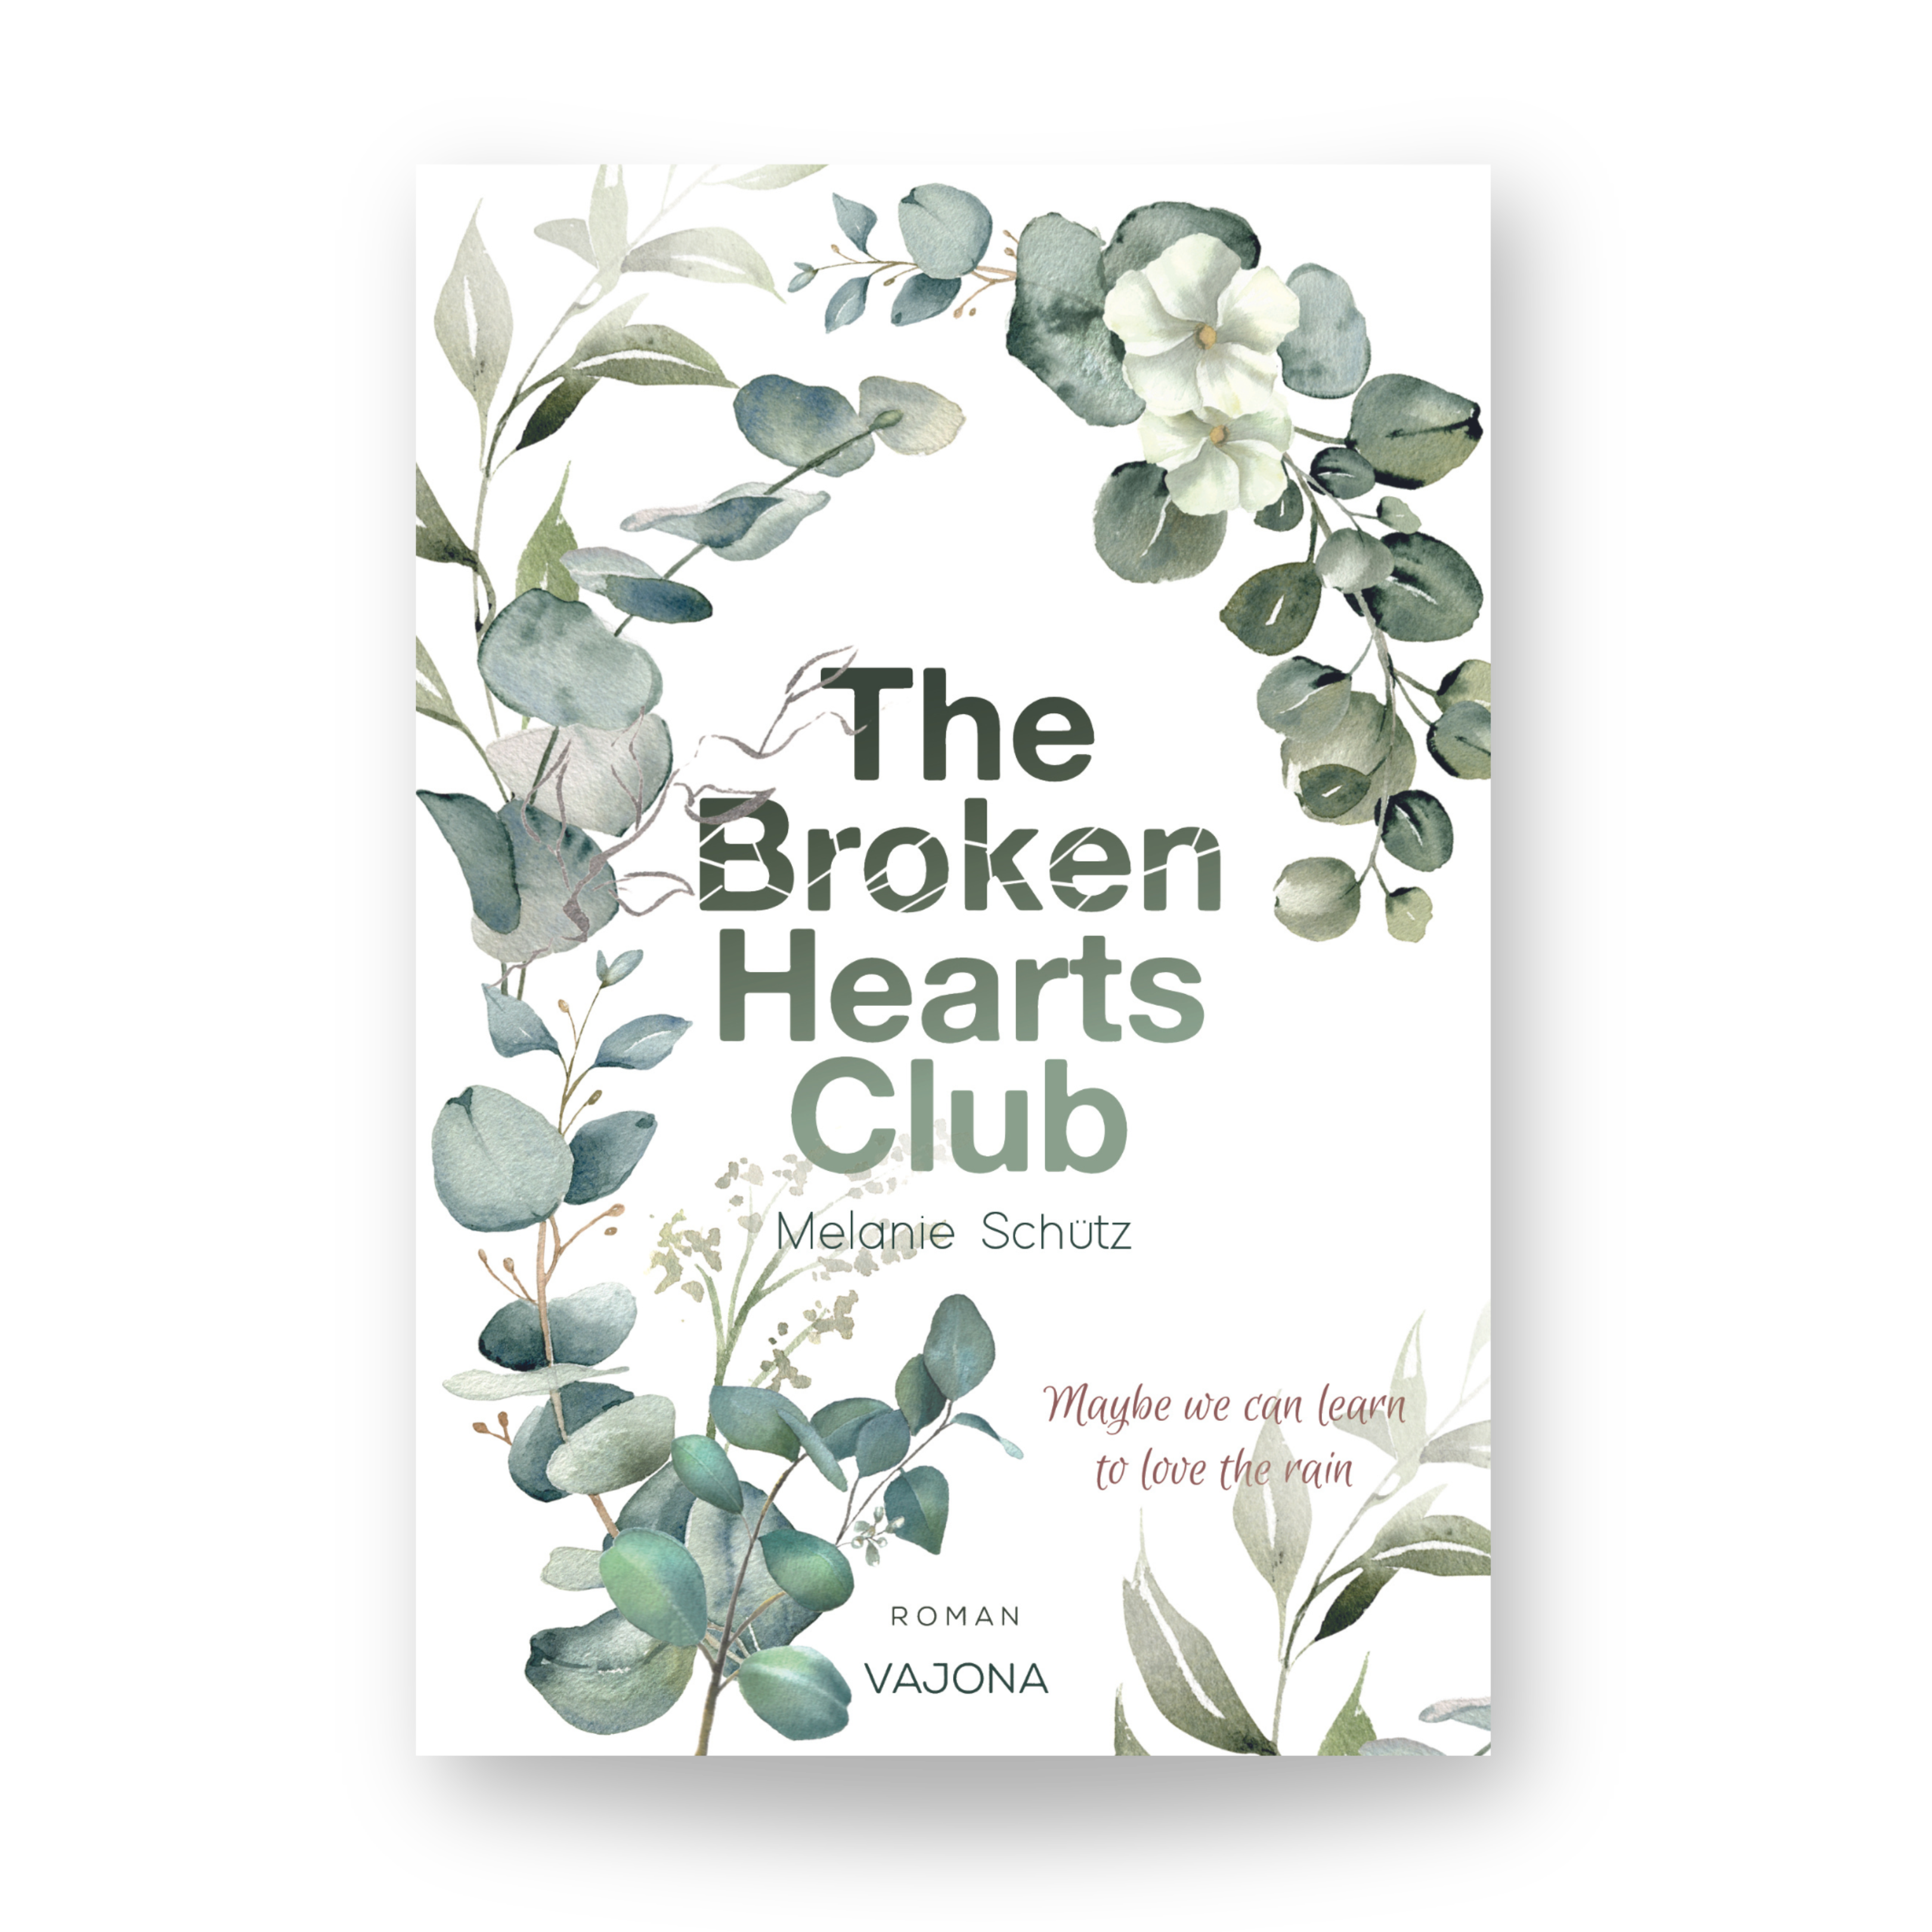 The Broken Hearts Club - Maybe we can learn to love the rain (1)